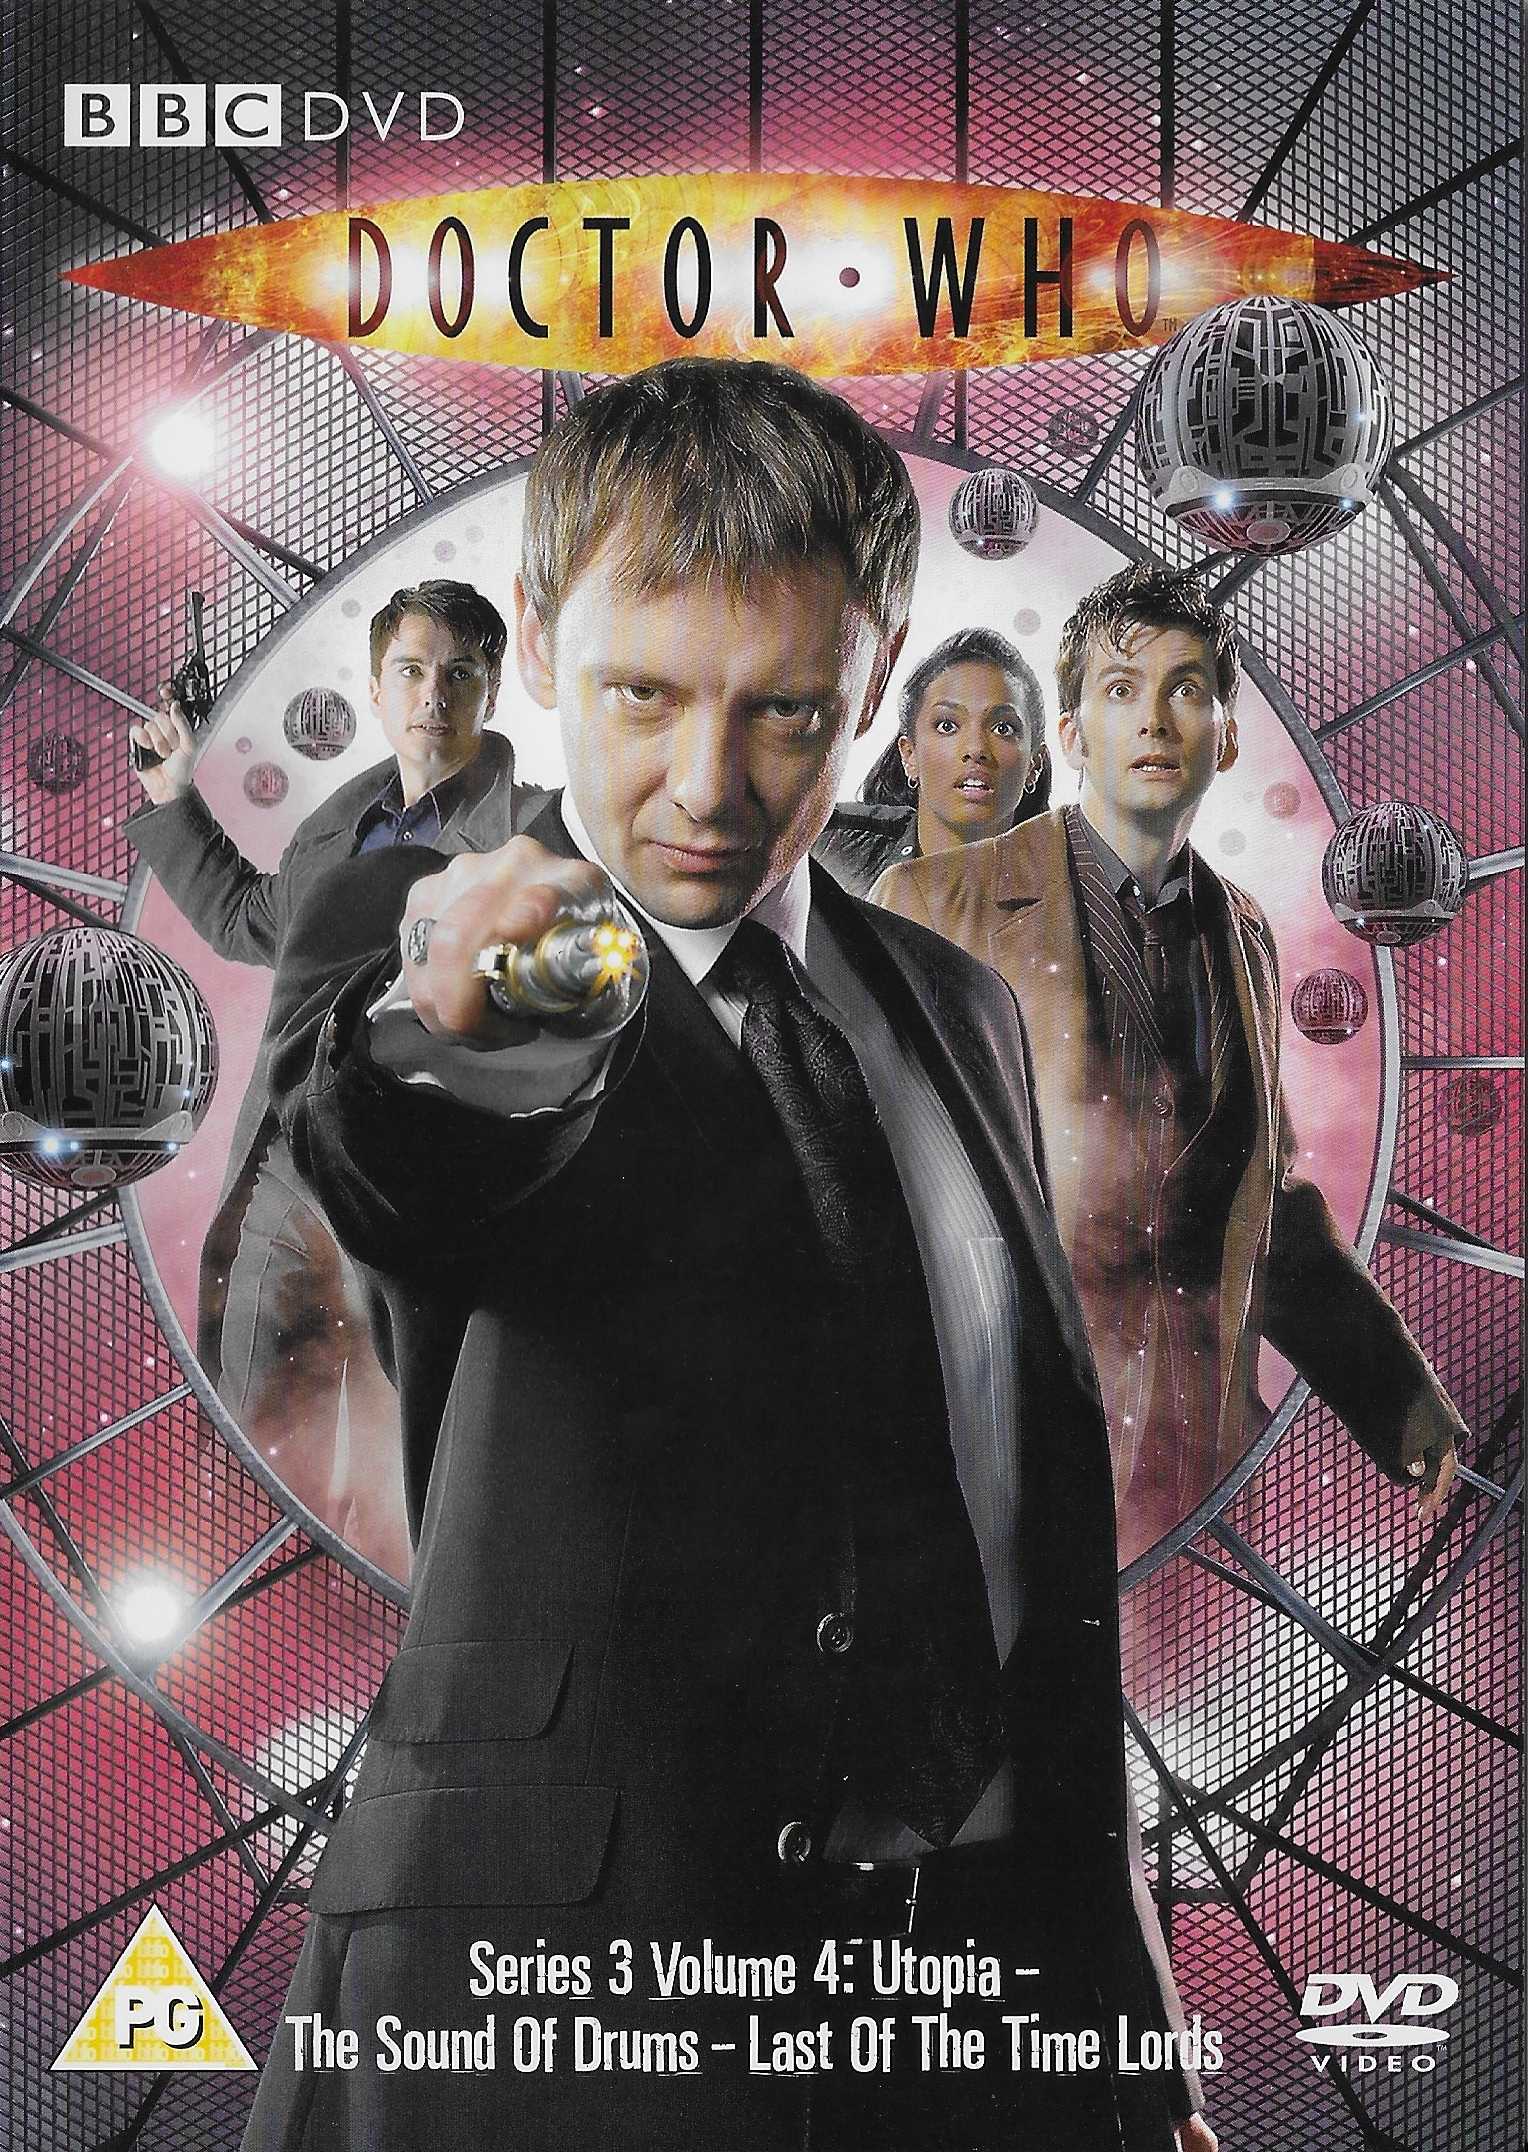 Picture of BBCDVD 2384 Doctor Who - Series 3, volume 4 by artist Russell T Davies from the BBC dvds - Records and Tapes library